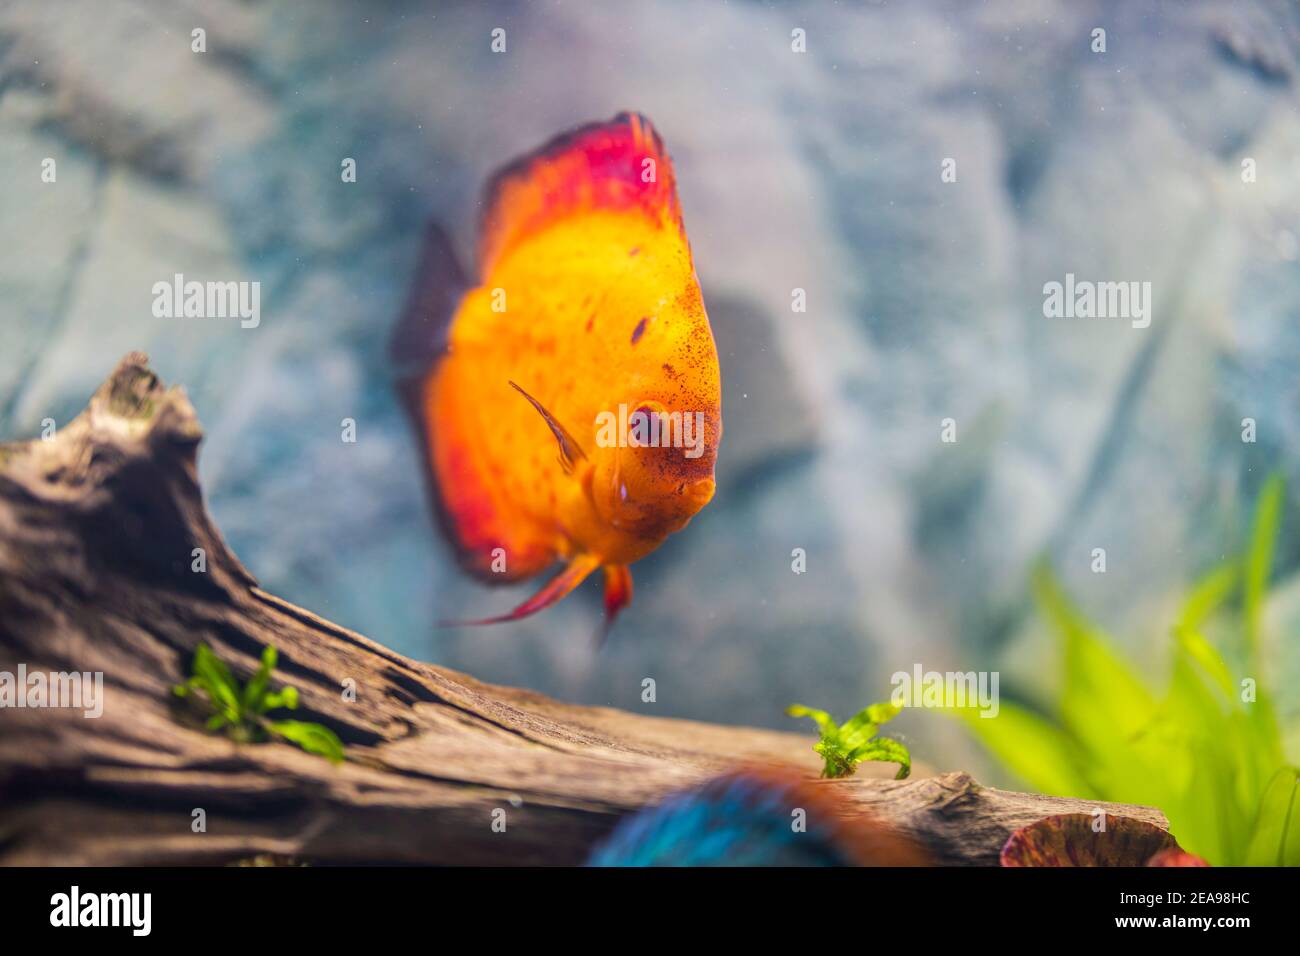 Close up view of gorgeous red melon discus aquarium fish isolated on blue background. Hobby concept. Stock Photo